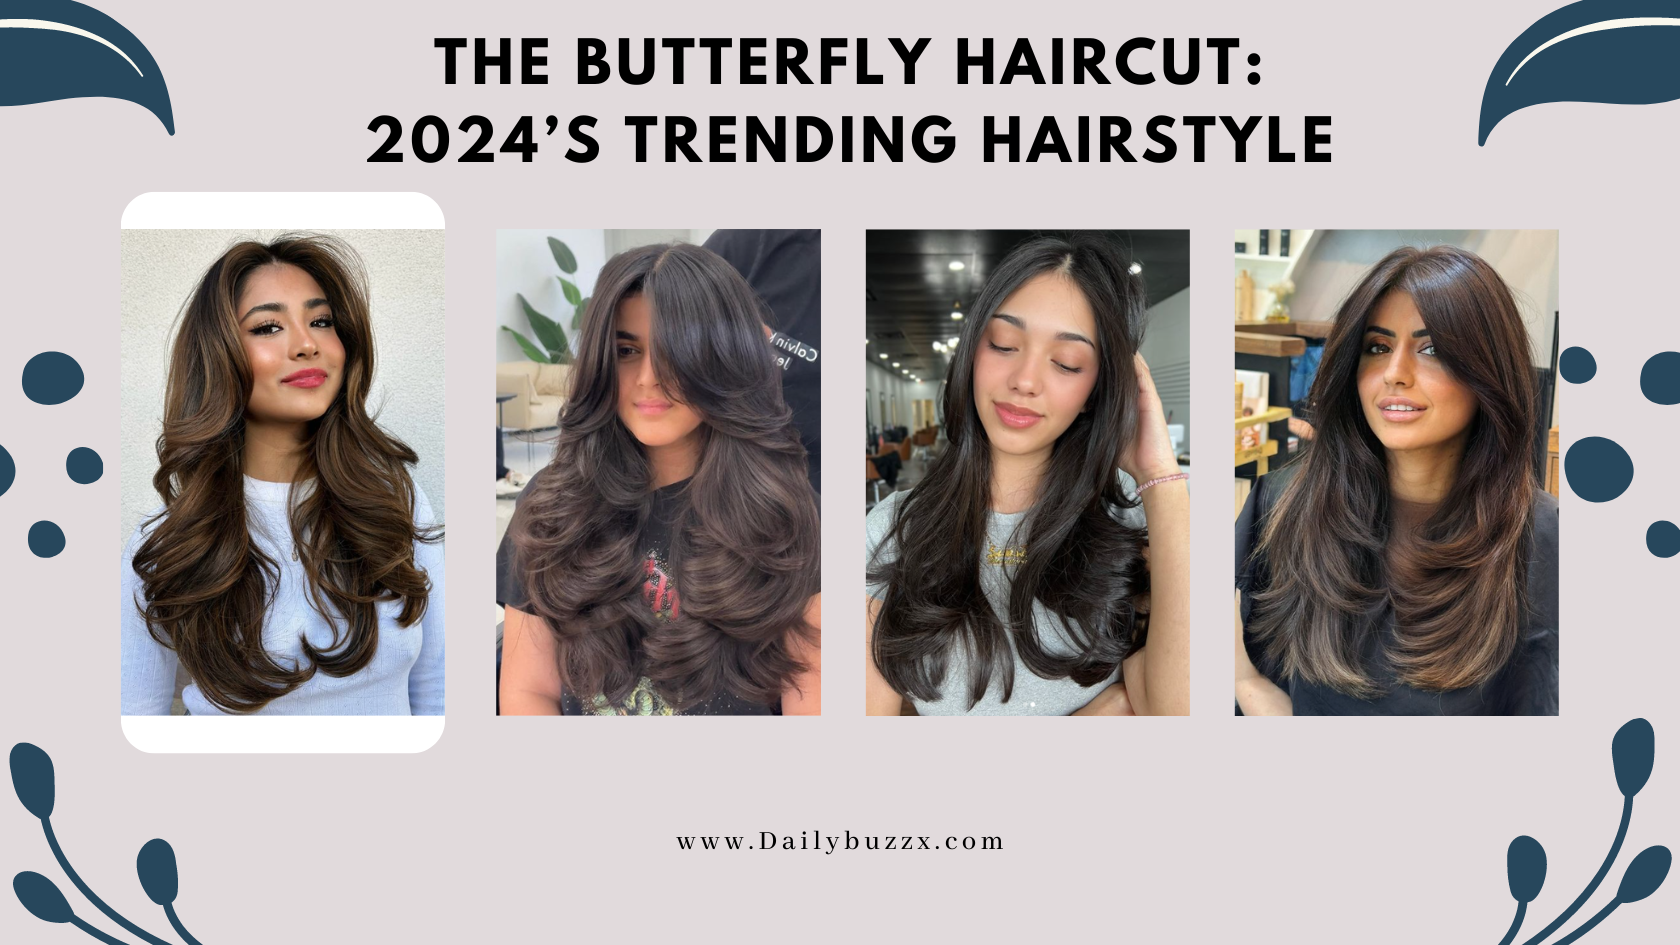 The Butterfly Haircut: 2024’s Trending Hairstyle on Pinterest